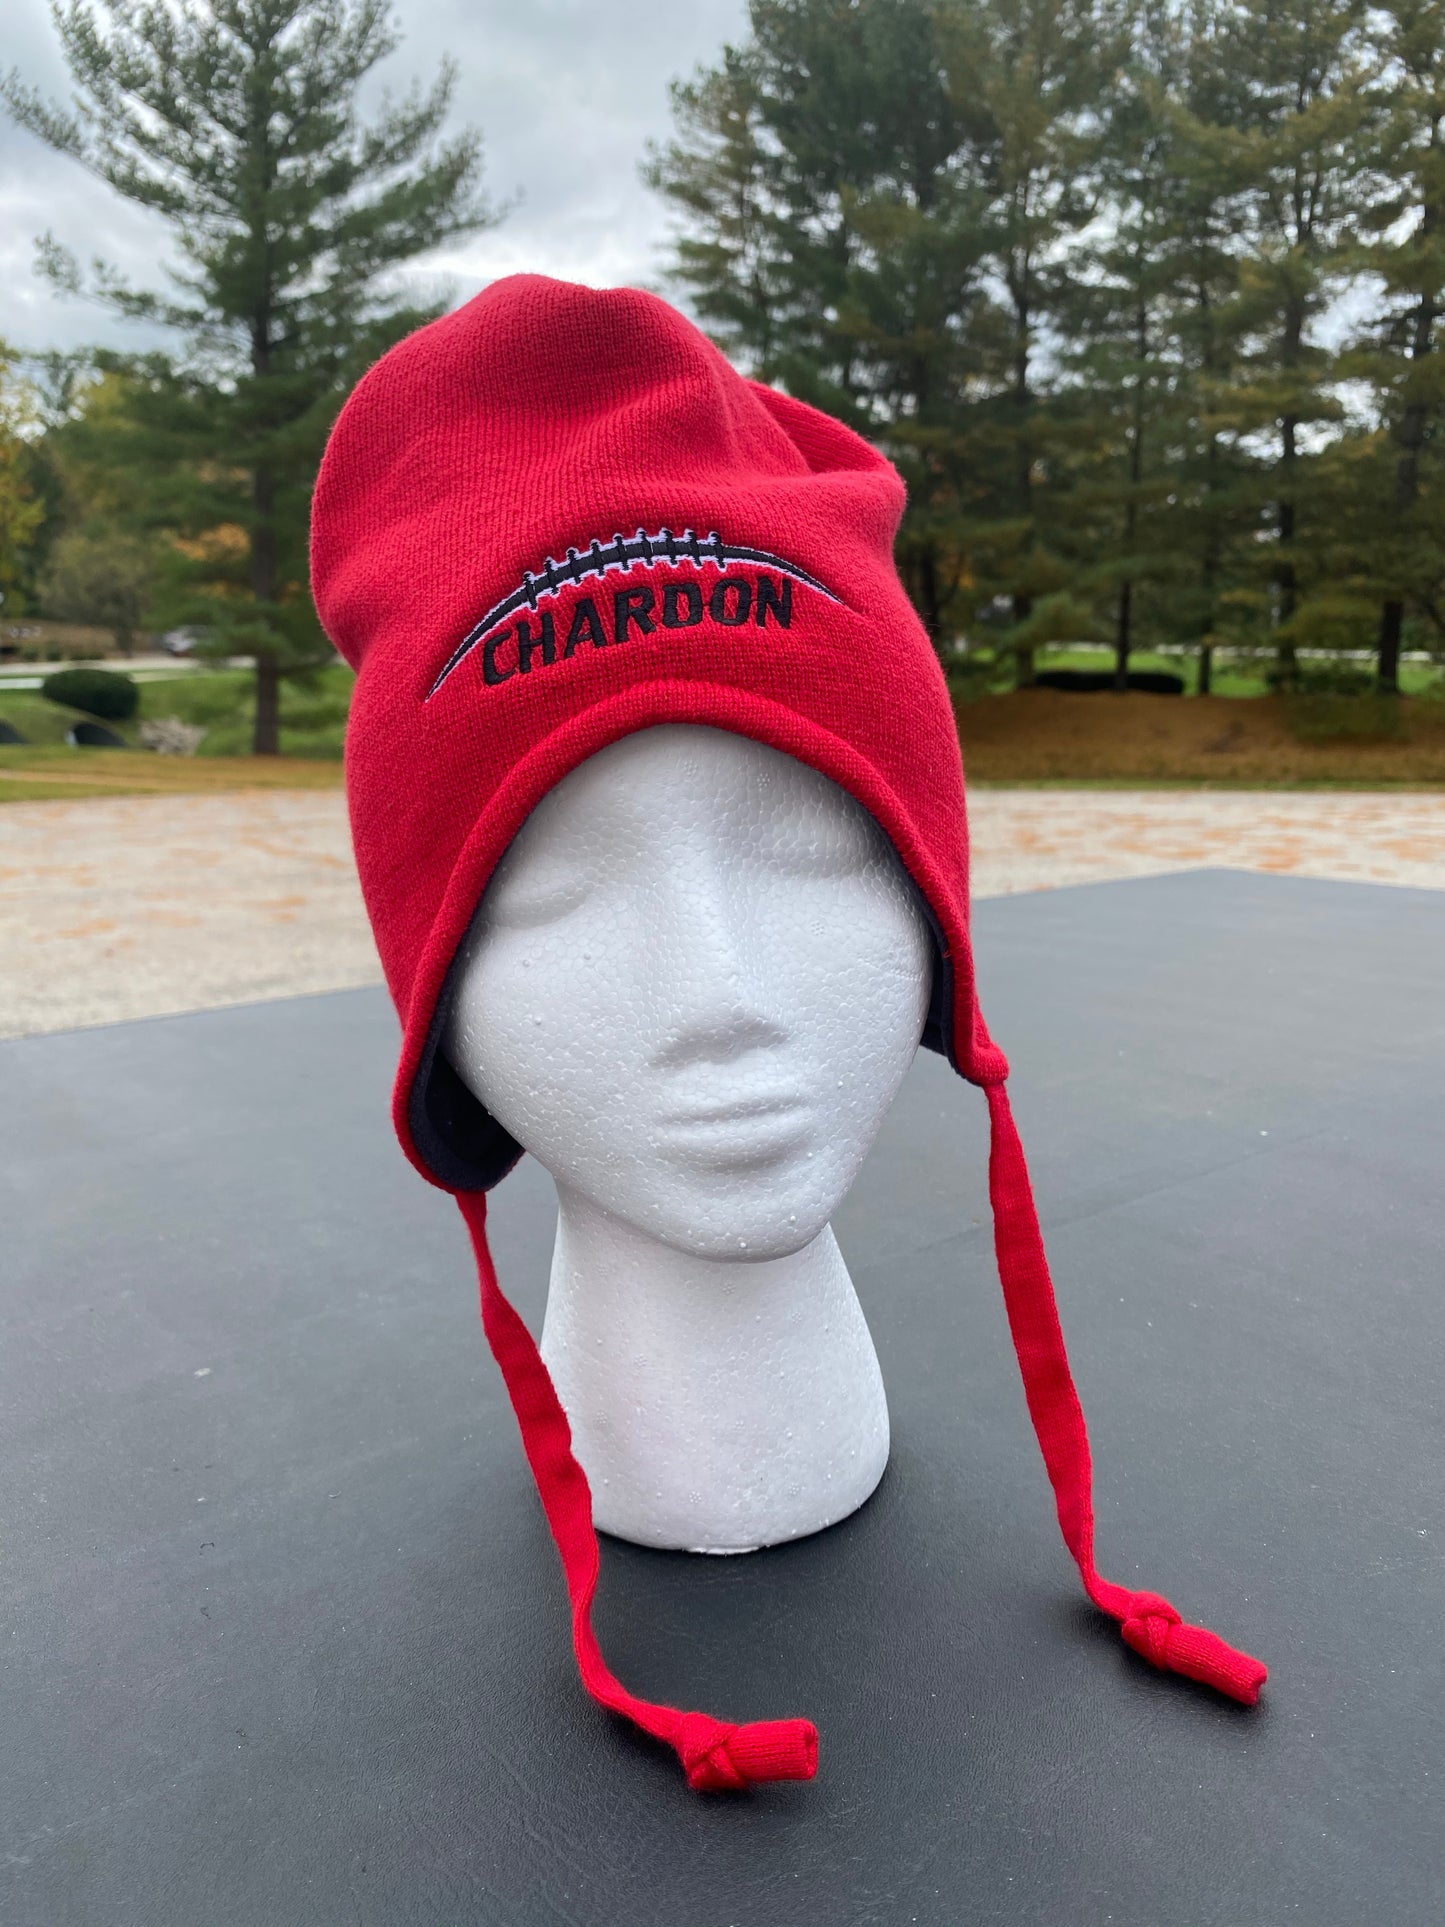 Embroidered Red Richardson Snow Hat with Chardon Football Logo